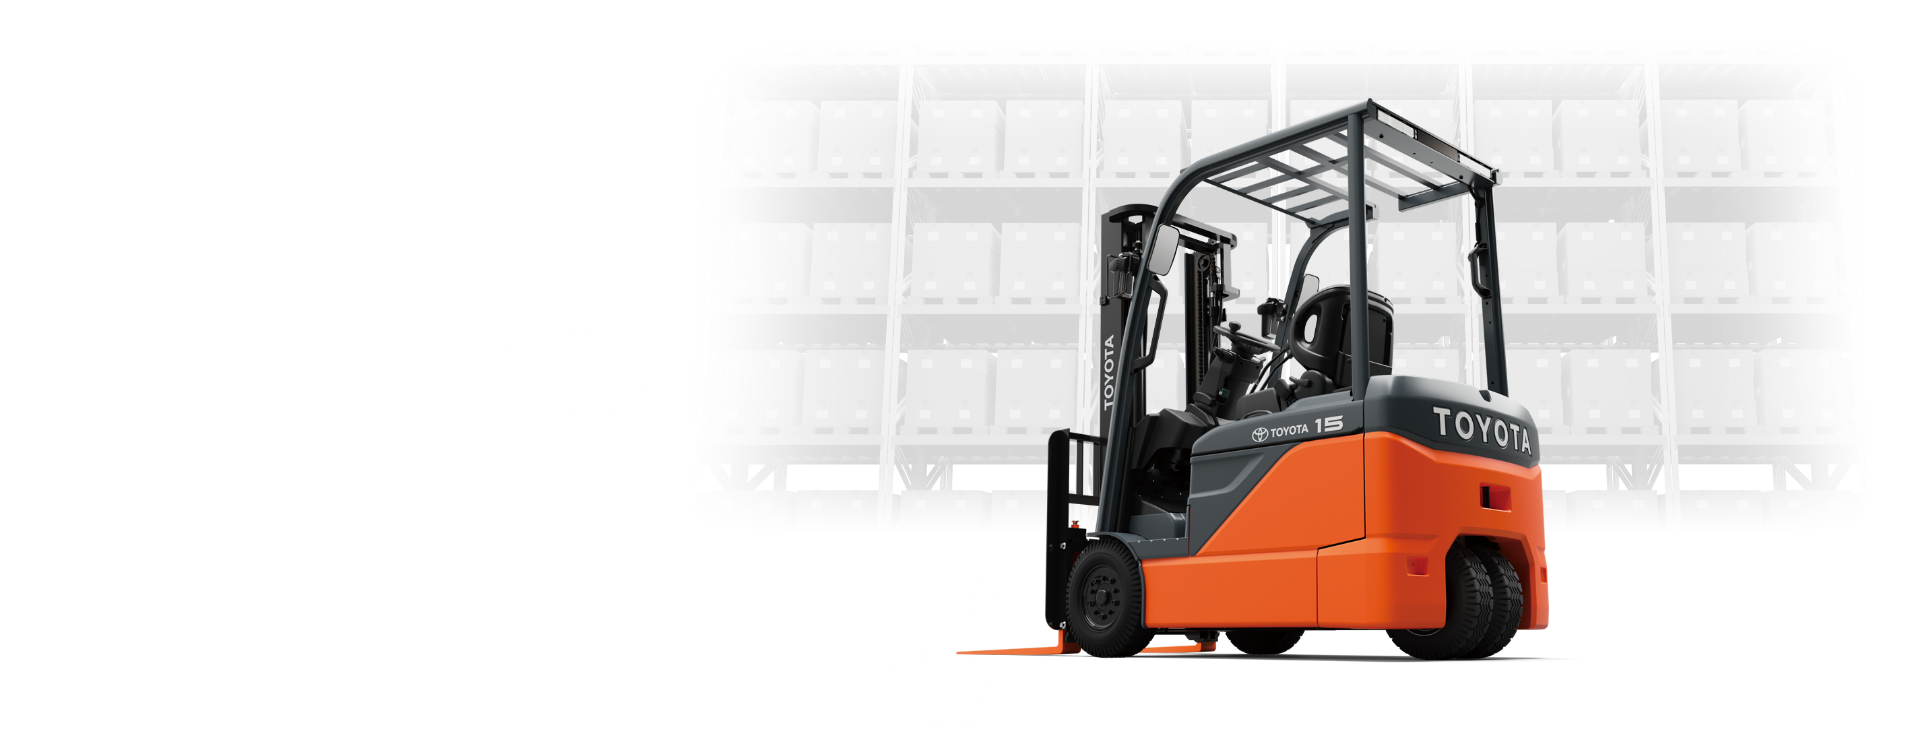 Toyota electric forklift 8FBE against a white background